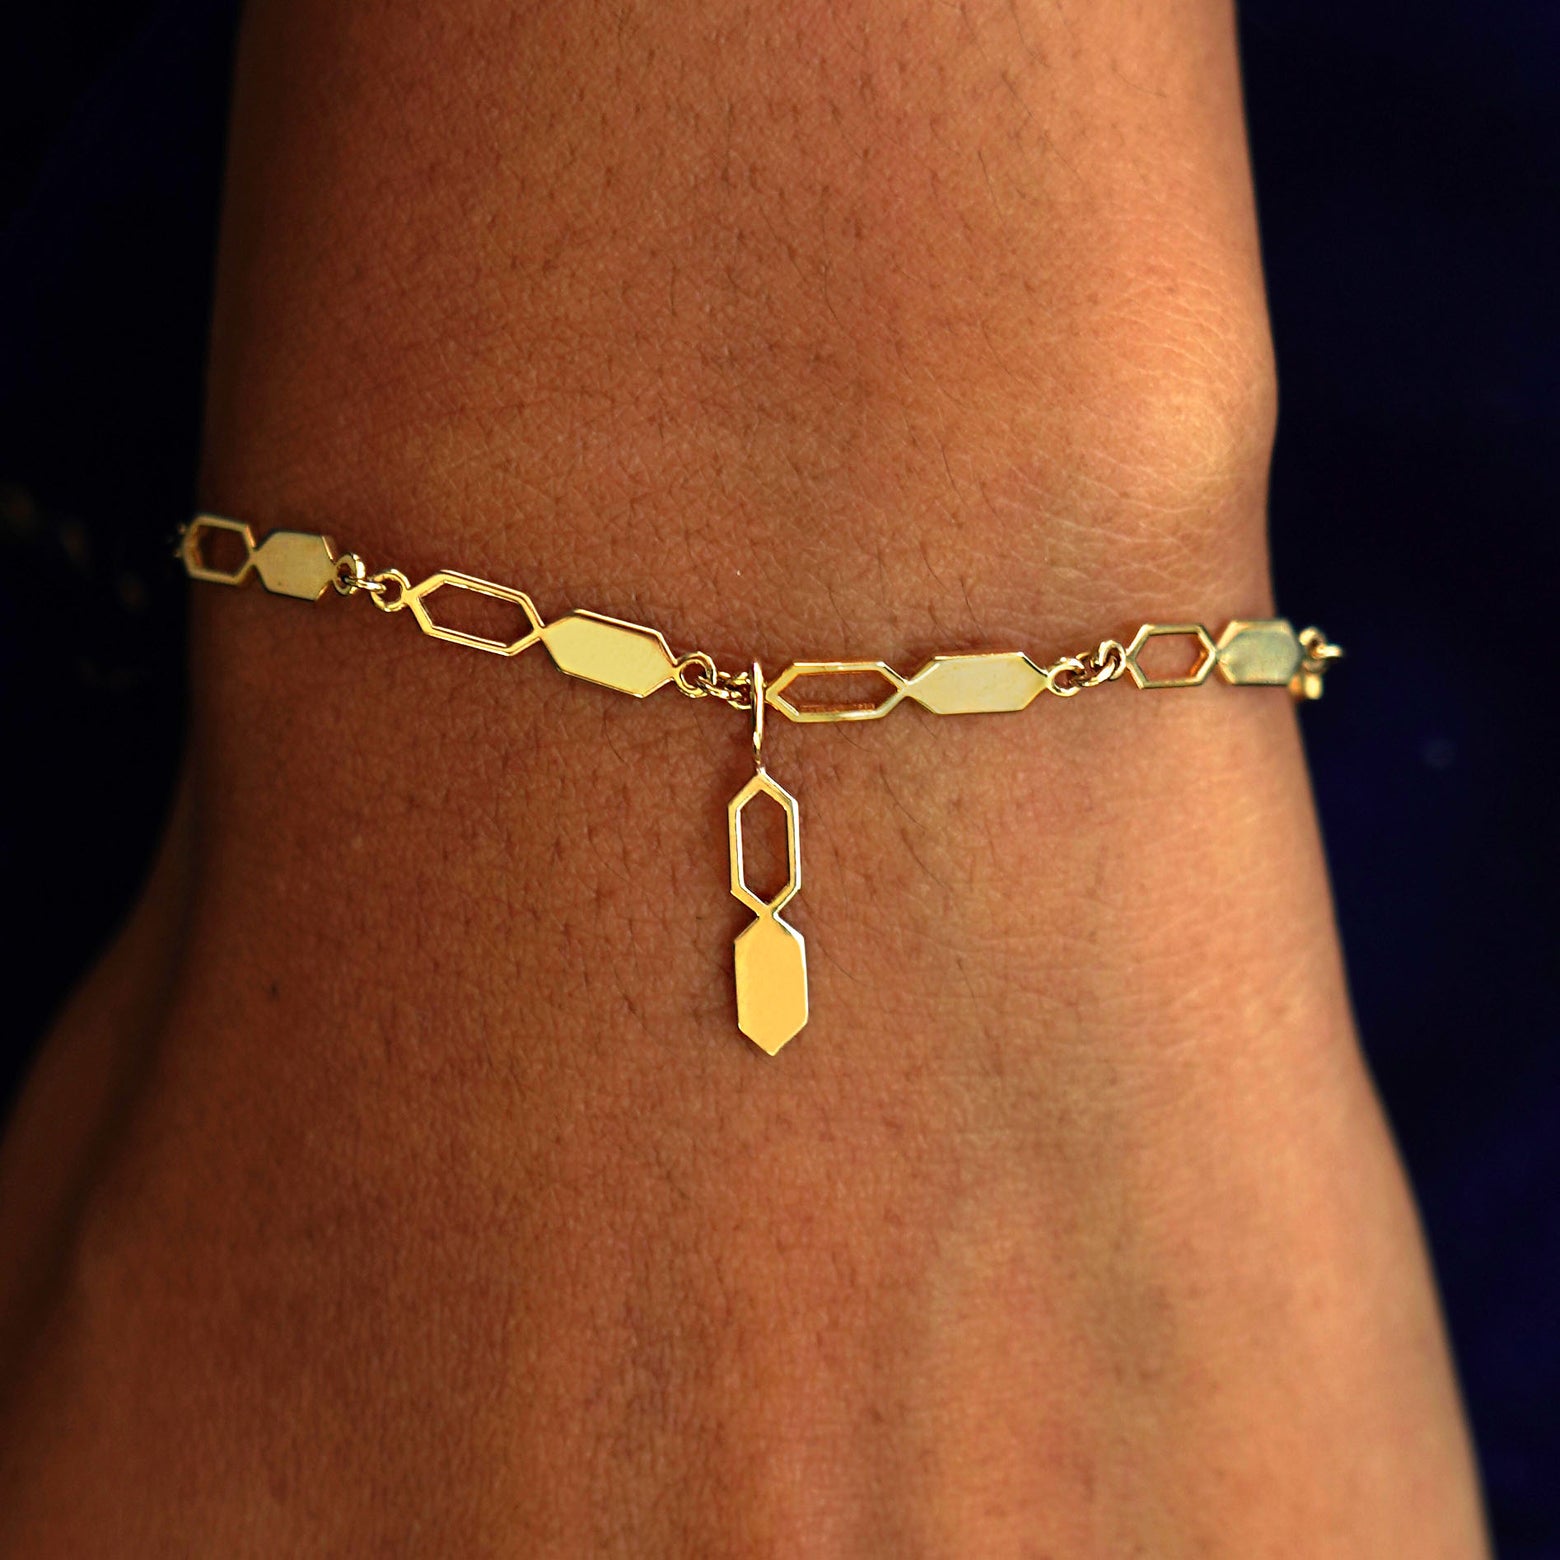 A model's wrist wearing a yellow gold Tanlah Chain with a Tanlah Charm